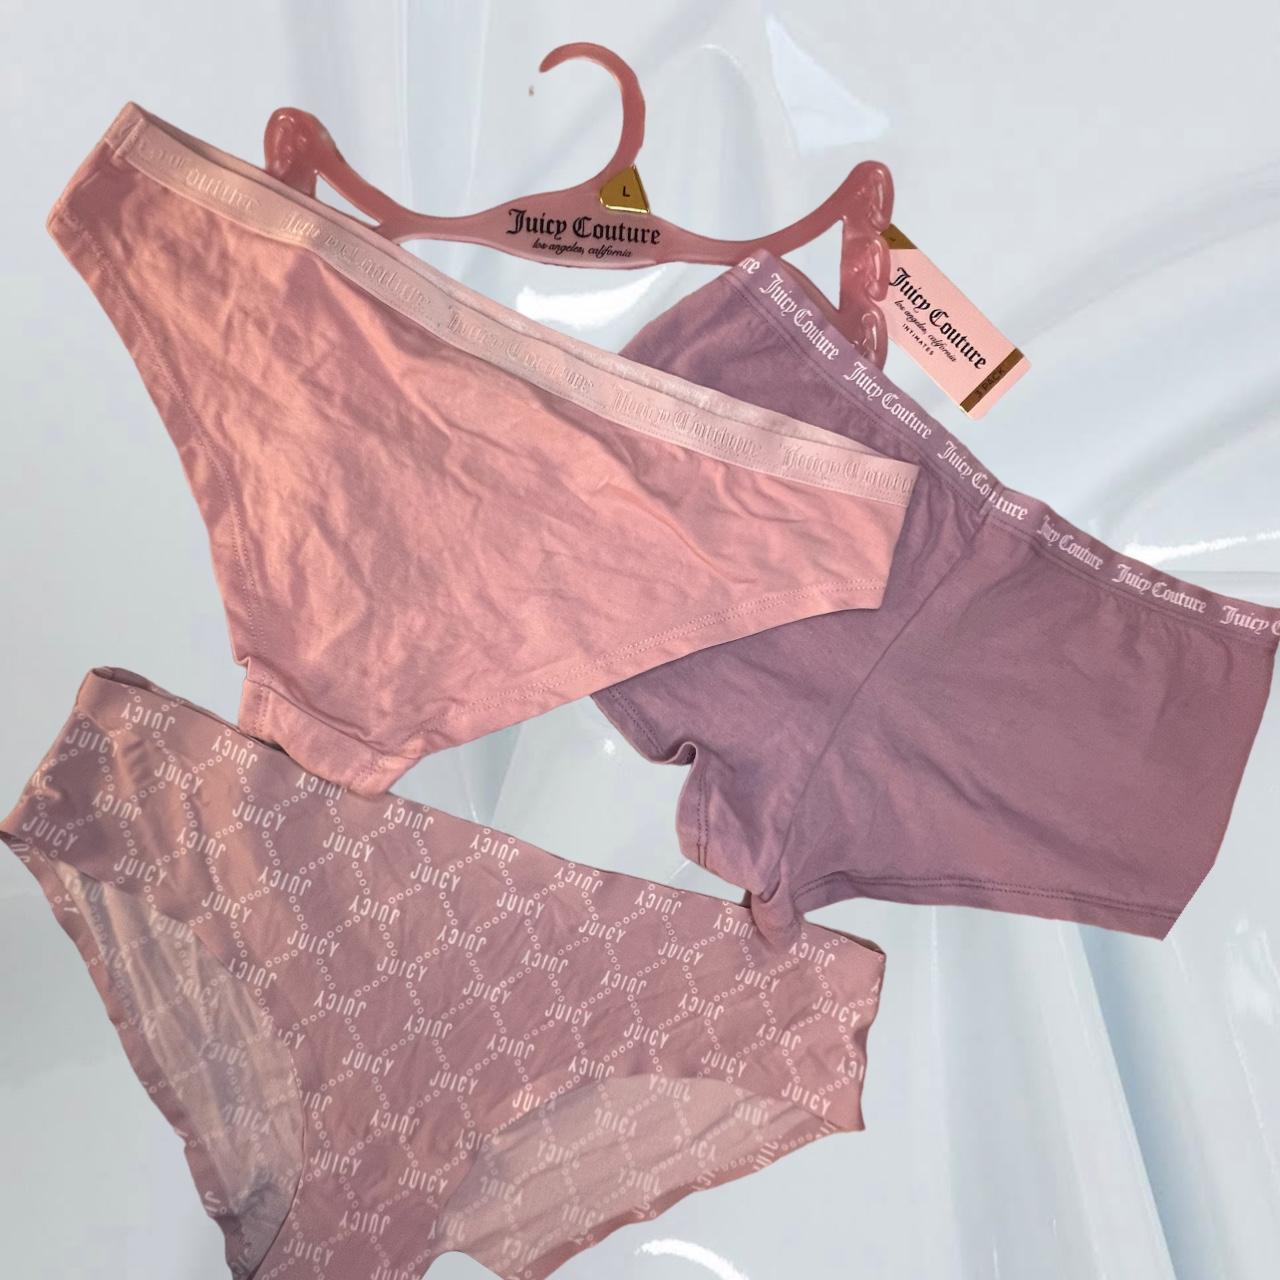 Shop JUICY COUTURE Women's Intimates